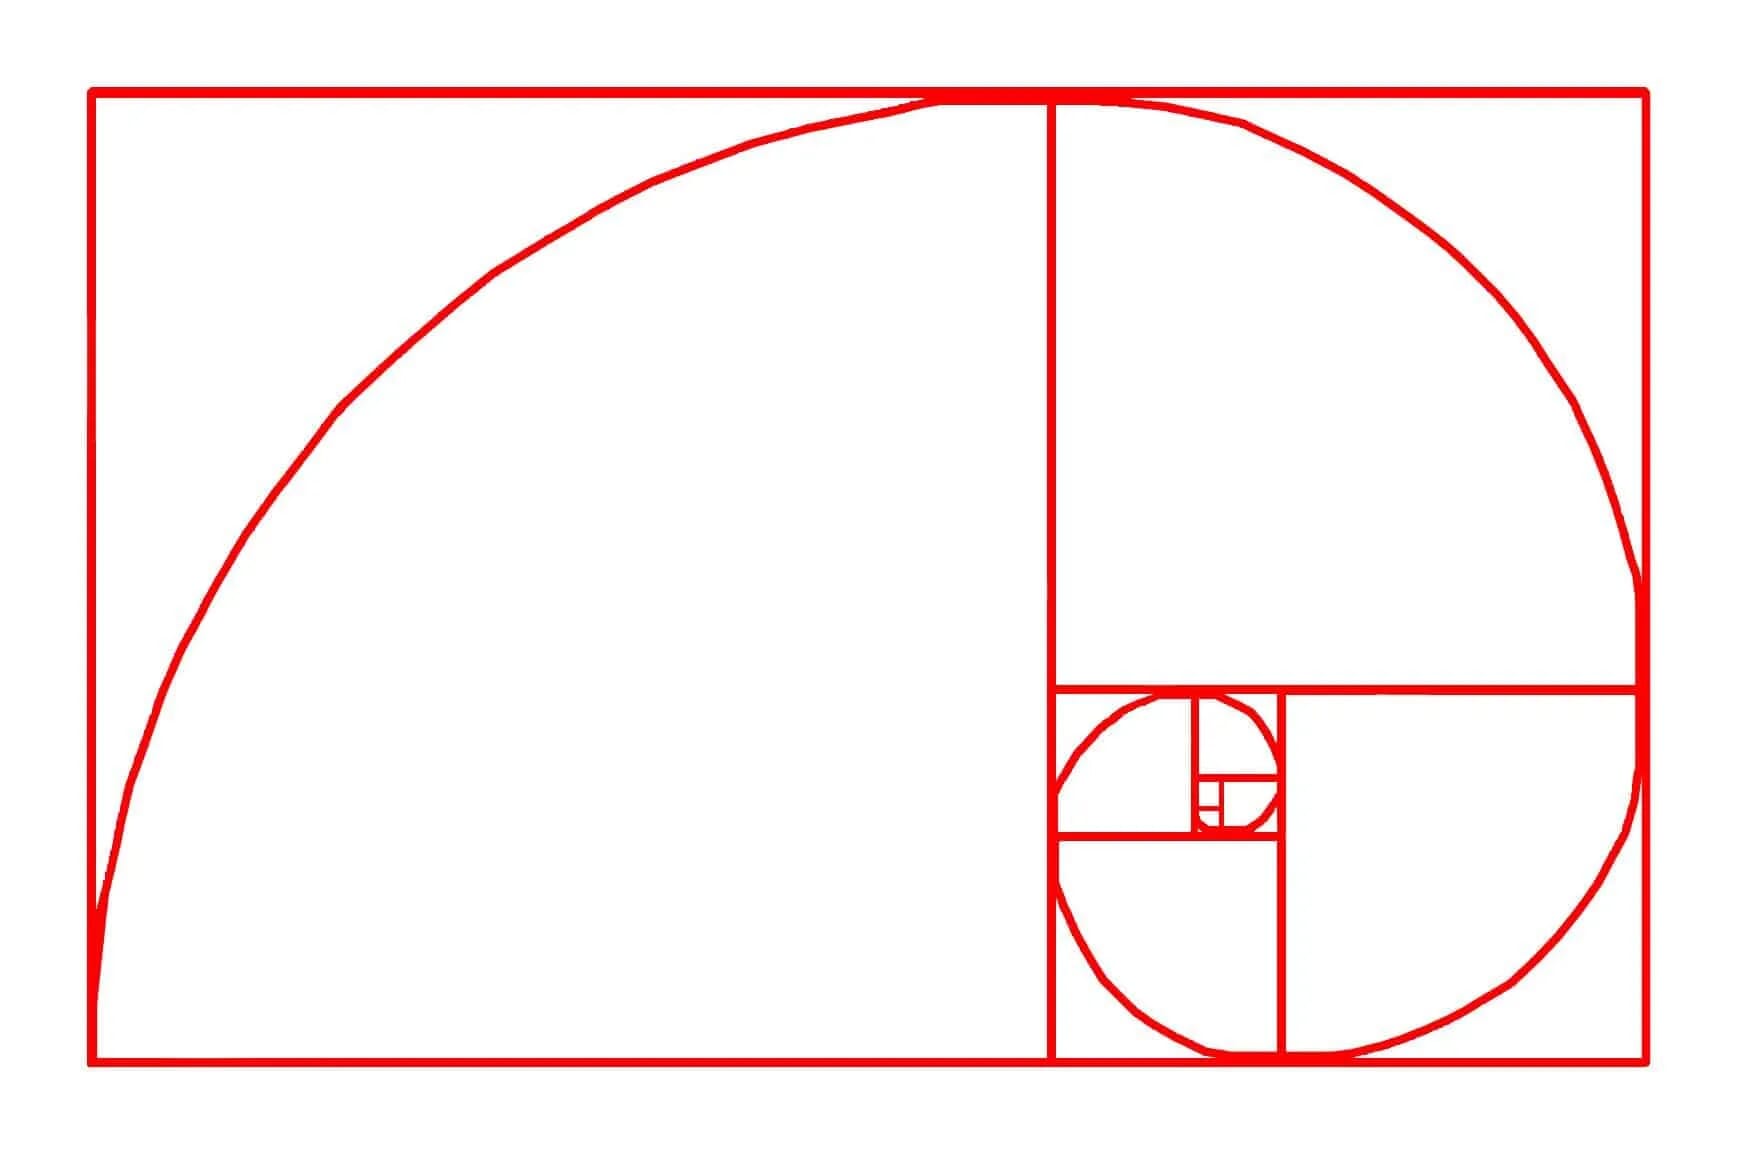 The golden spiral drawn in red on a white background.